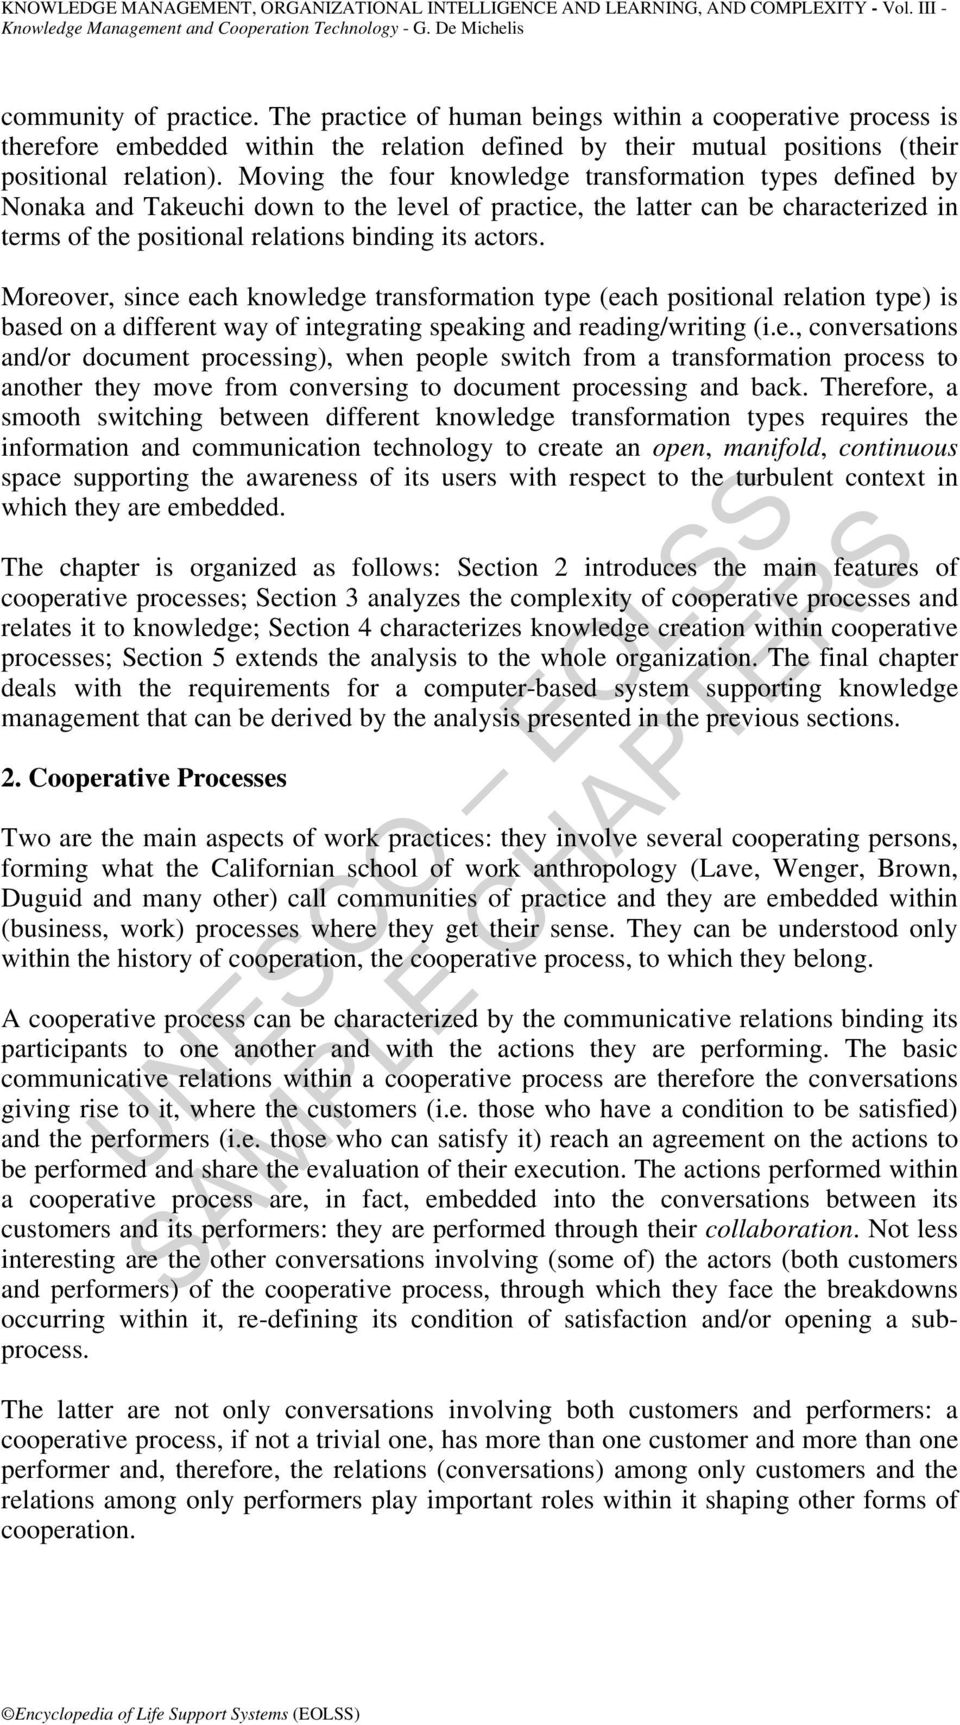 Moreover, since each knowledge transformation type (each positional relation type) is based on a different way of integrating speaking and reading/writing (i.e., conversations and/or document processing), when people switch from a transformation process to another they move from conversing to document processing and back.